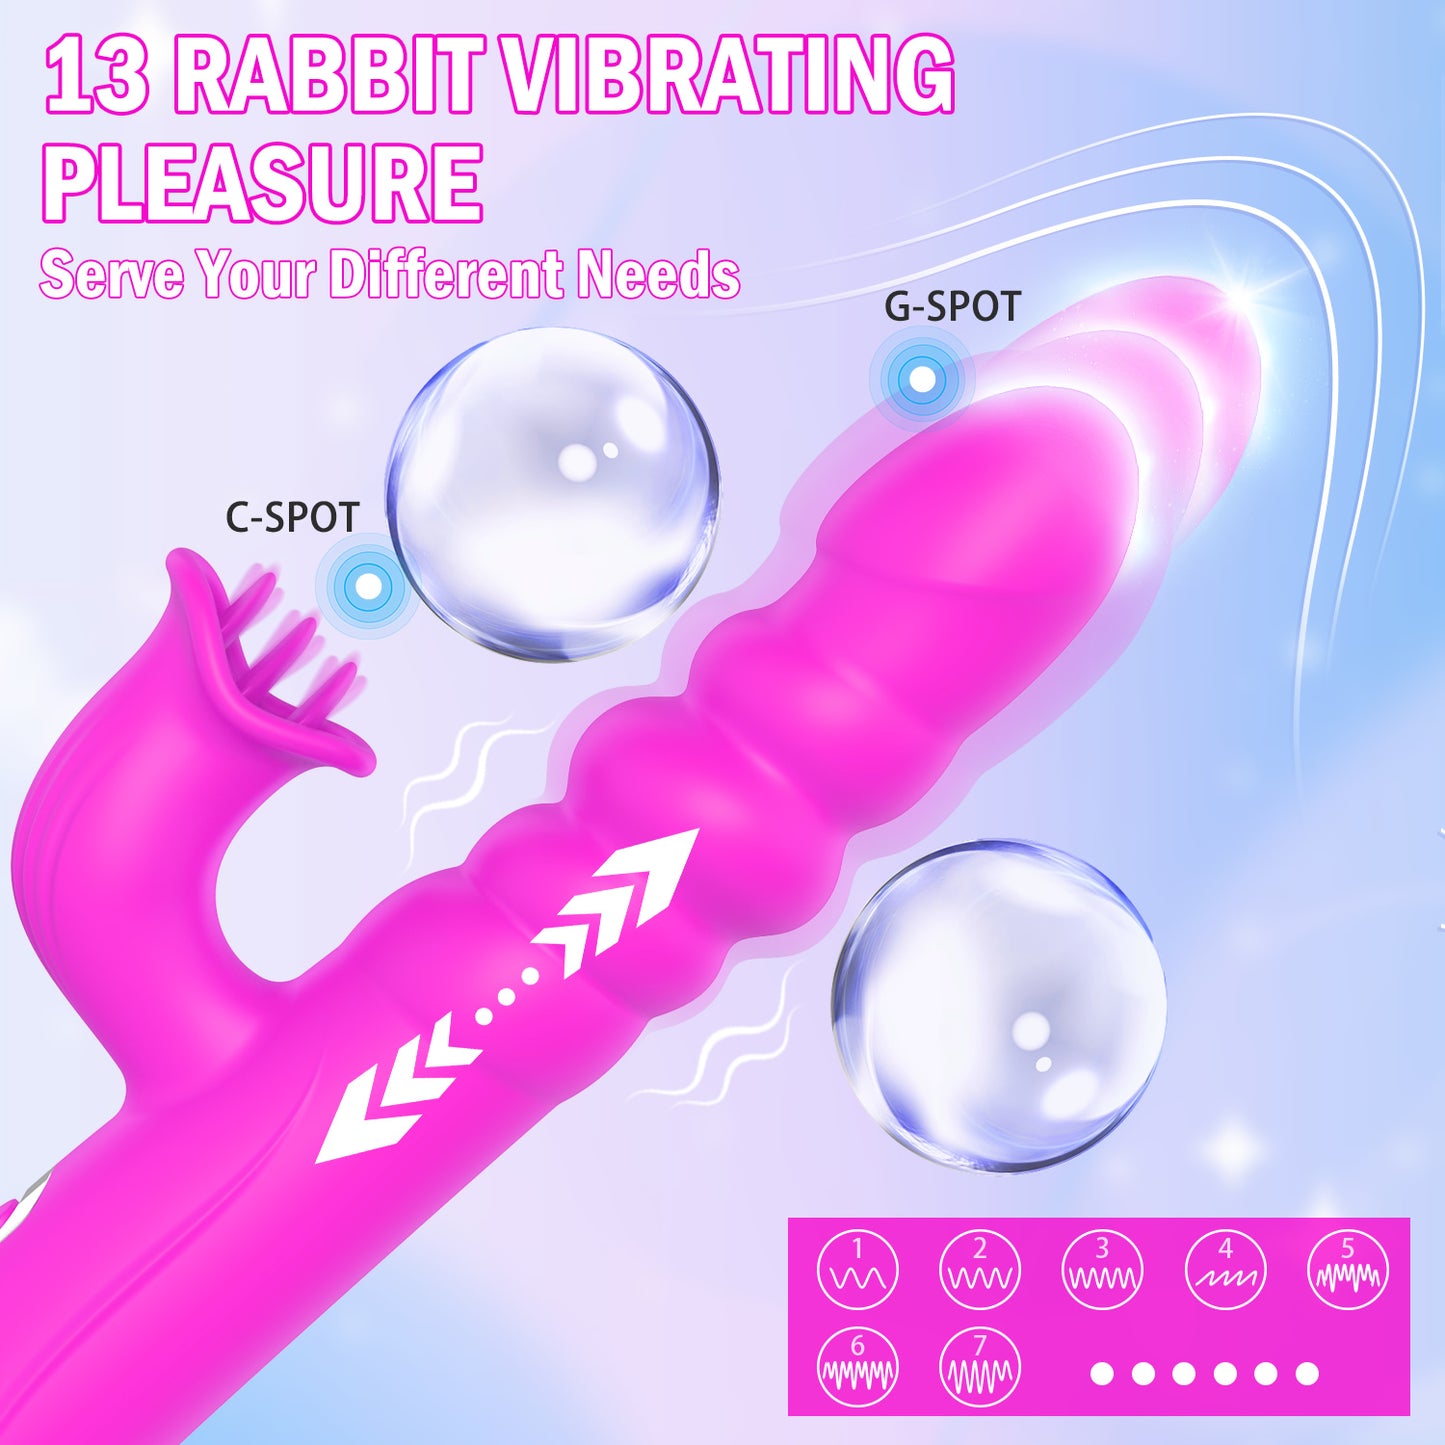 8X Thrust Rotate Vibration Rabbit Sex Toy with 5 Tongue Licking Modes